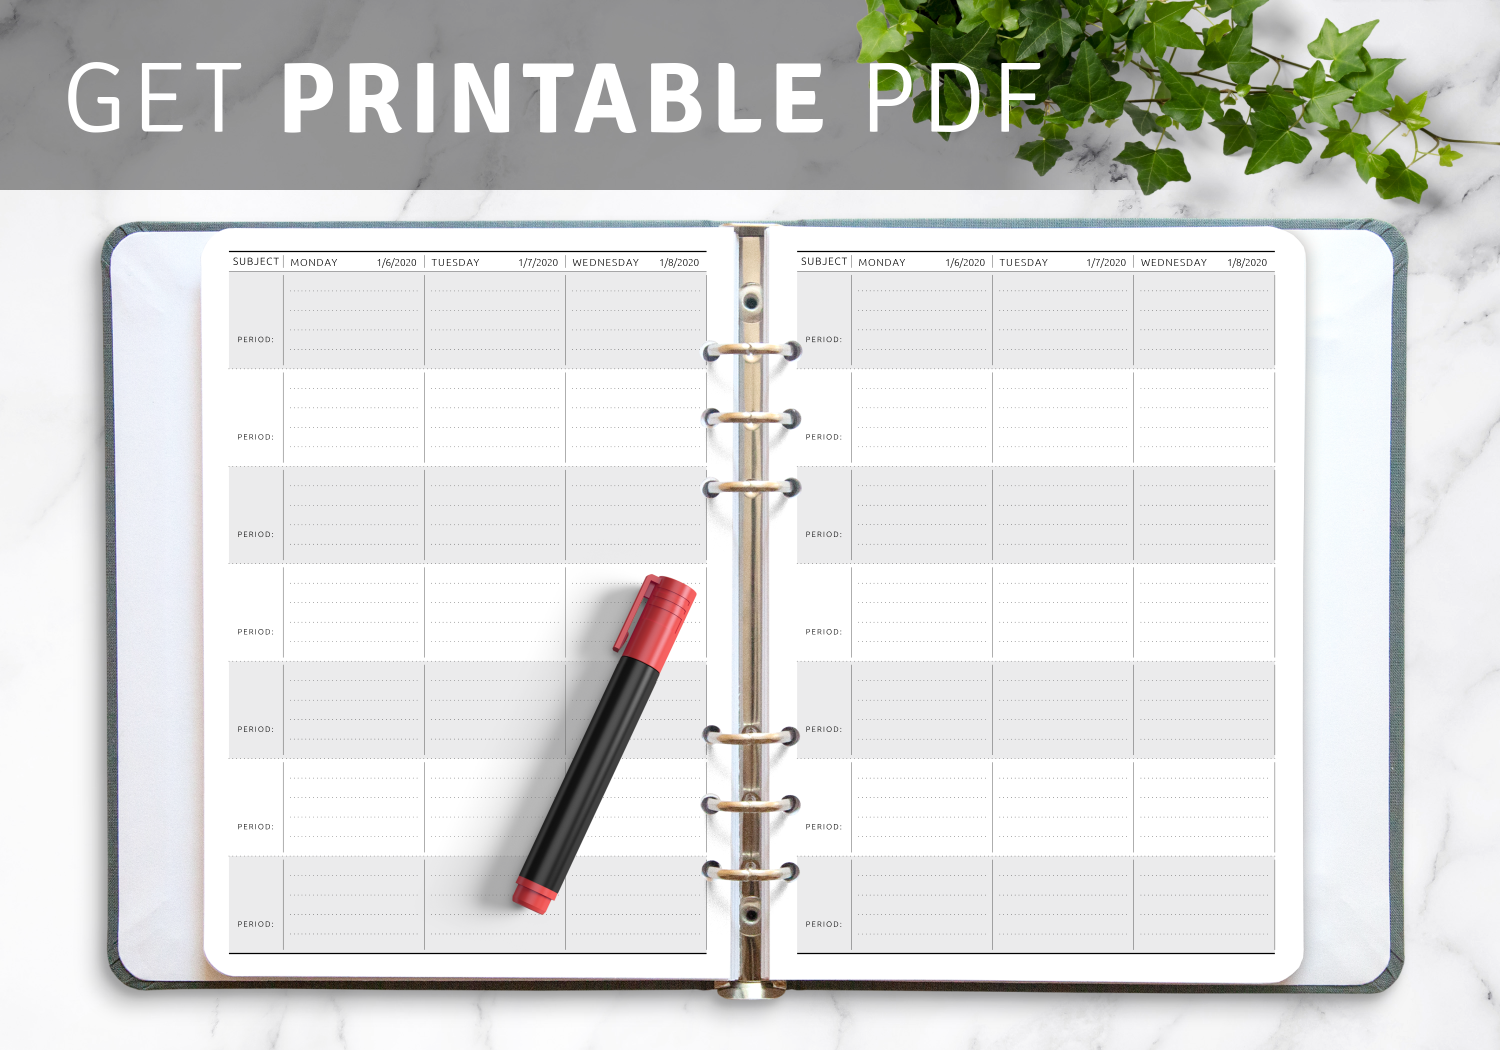 Printable weekly lesson plan templates